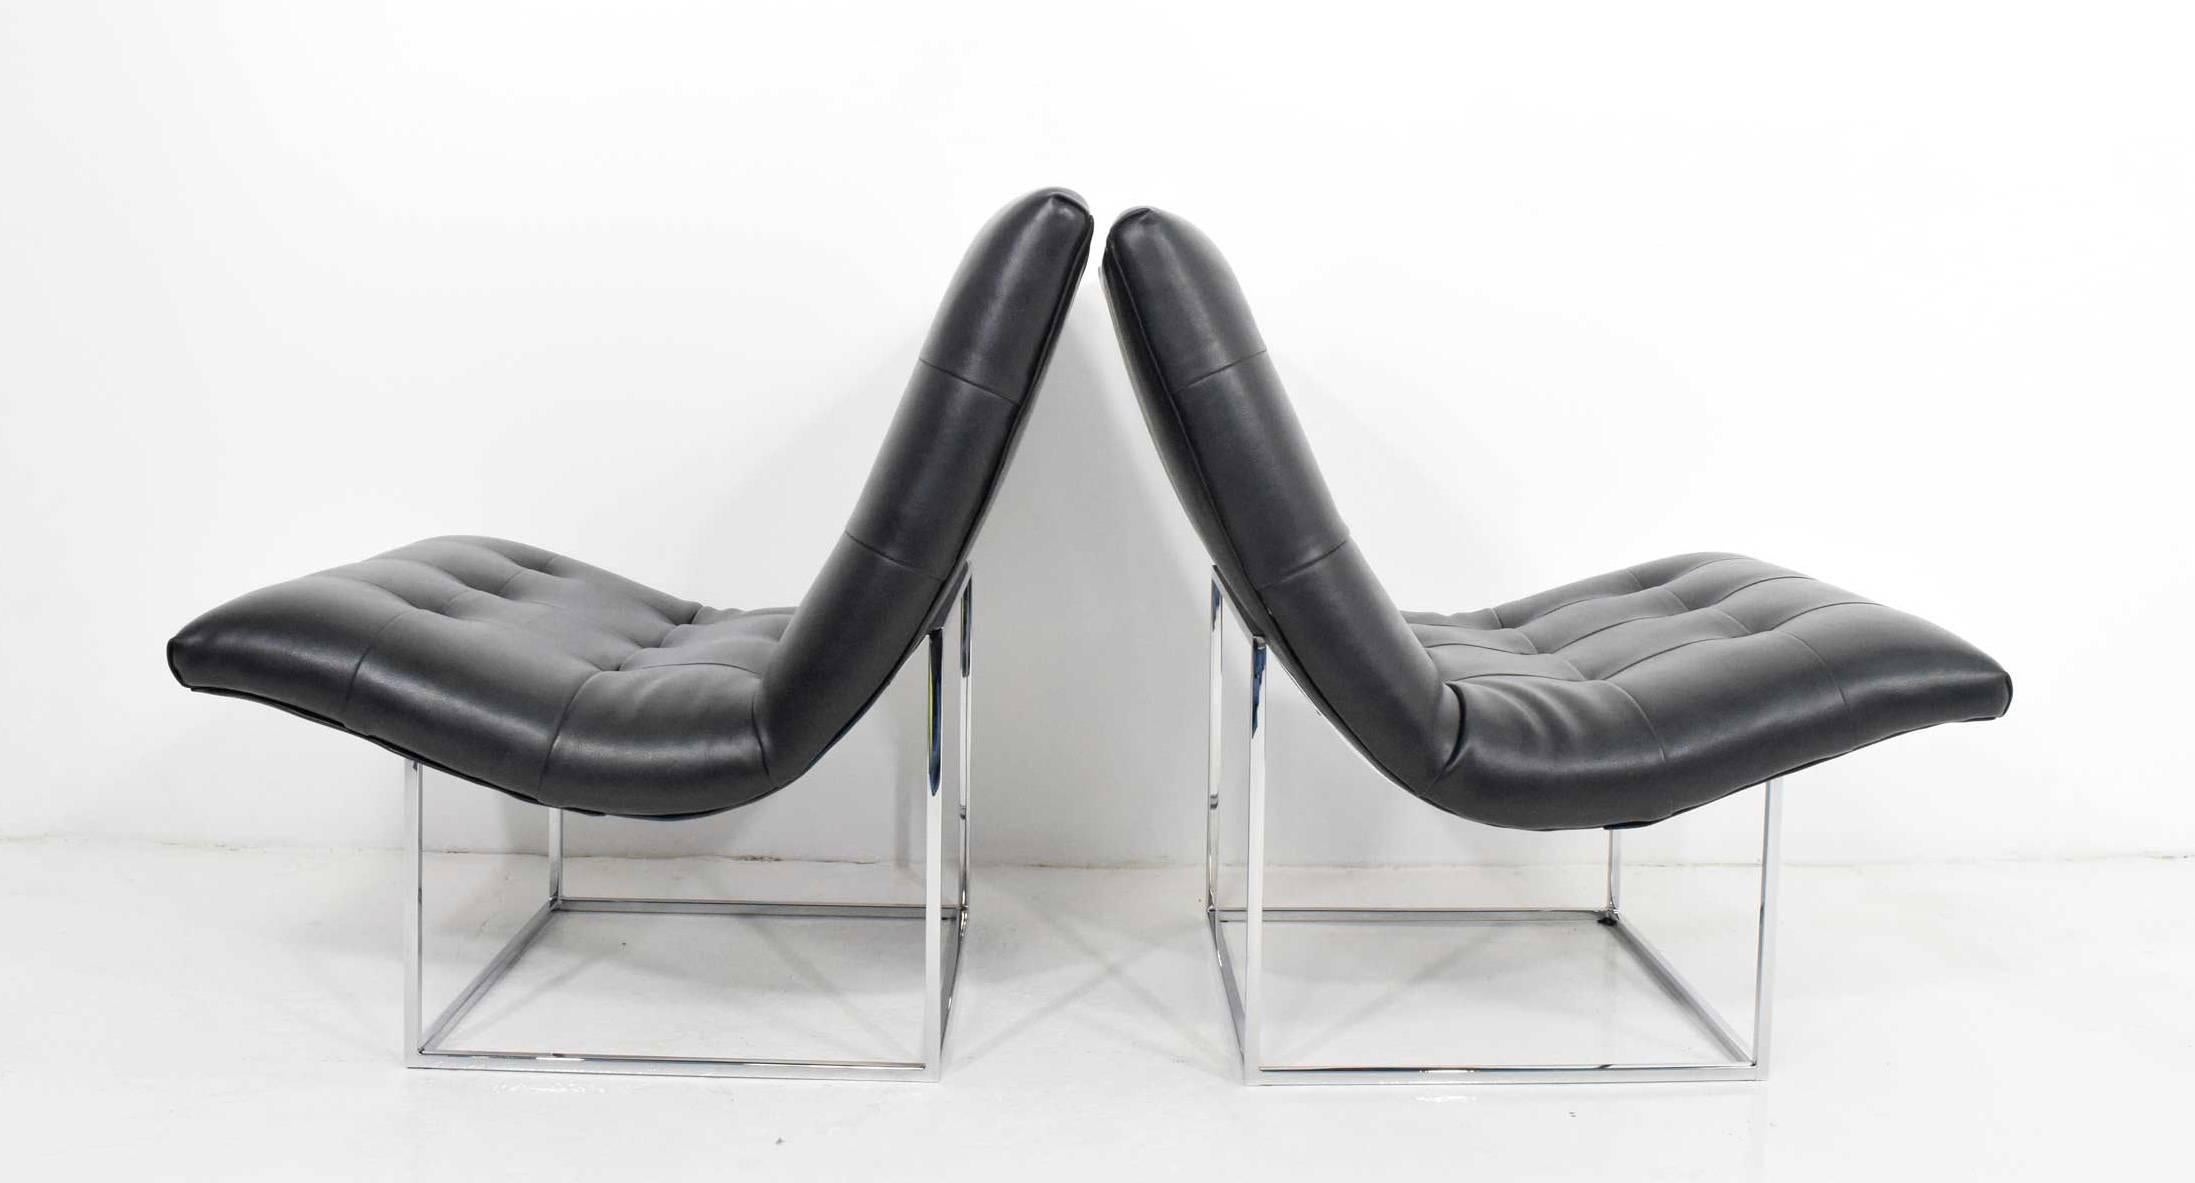 Pair of Milo Baughman lounge chairs in tufted faux leather and chrome bases.